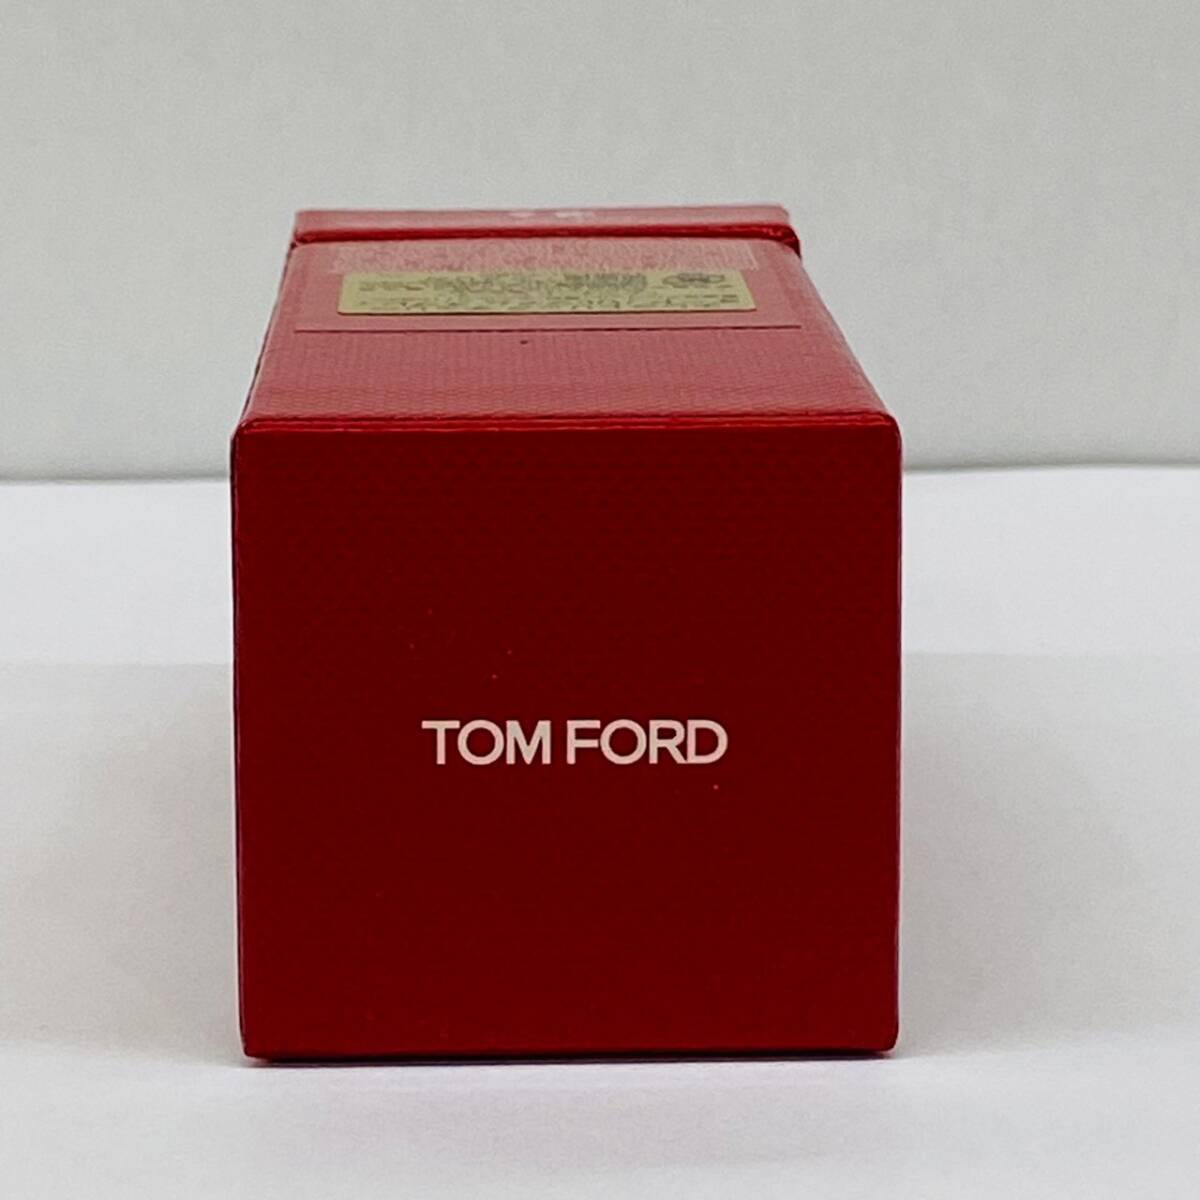 [IK-28238]1 jpy ~ TOMFORD ELECTRIC CHERRY Tom Ford o-do Pal fams pre . electric Cherry 50ml perfume unopened 